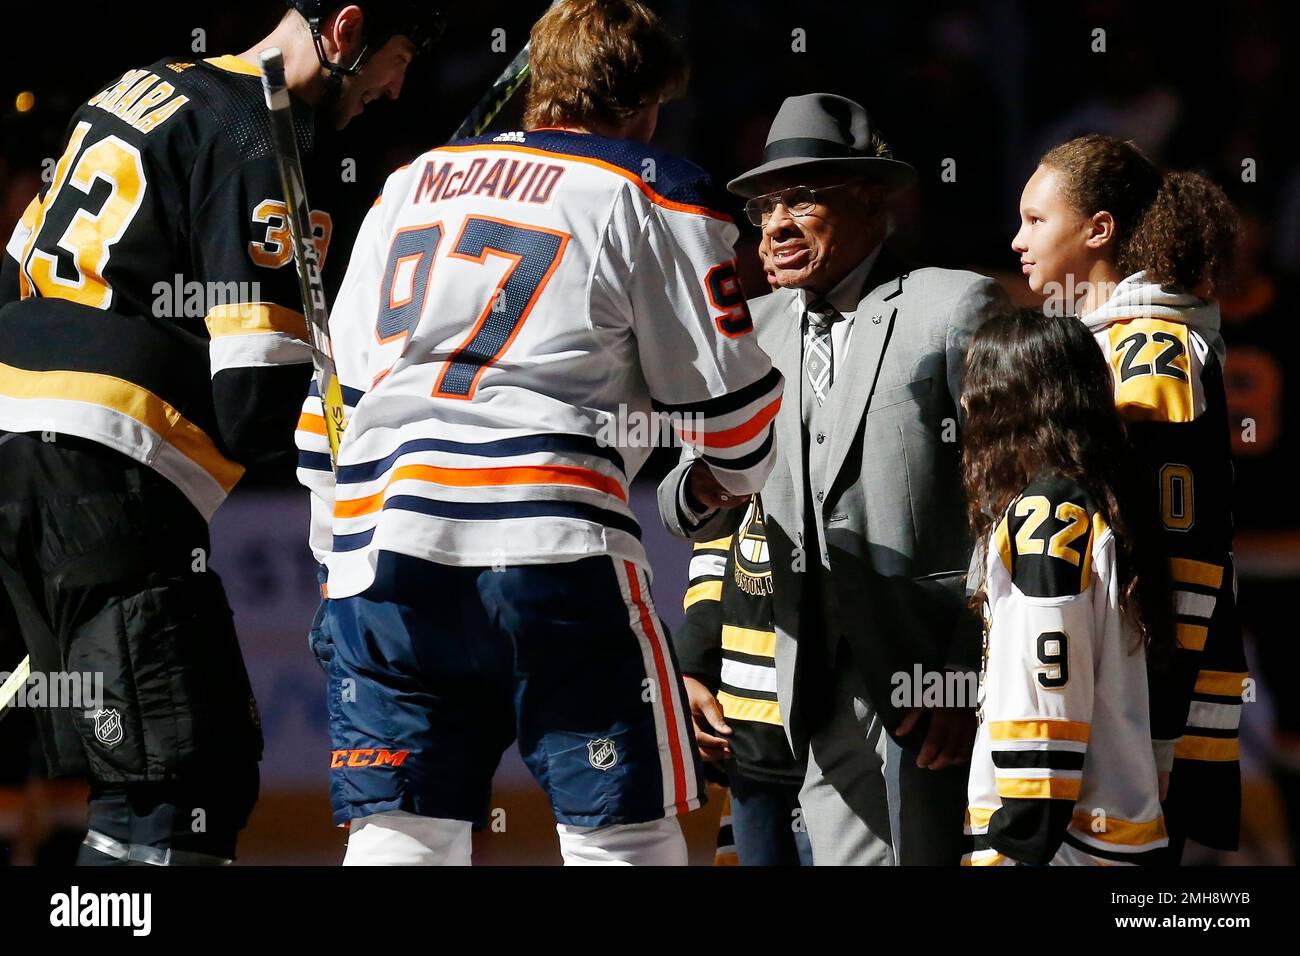 Willie O'Ree, the first black hockey player in the NHL, is honored before  the start of the second period during the NHL All-Star Game at Philips  Arena in Atlanta on January 27